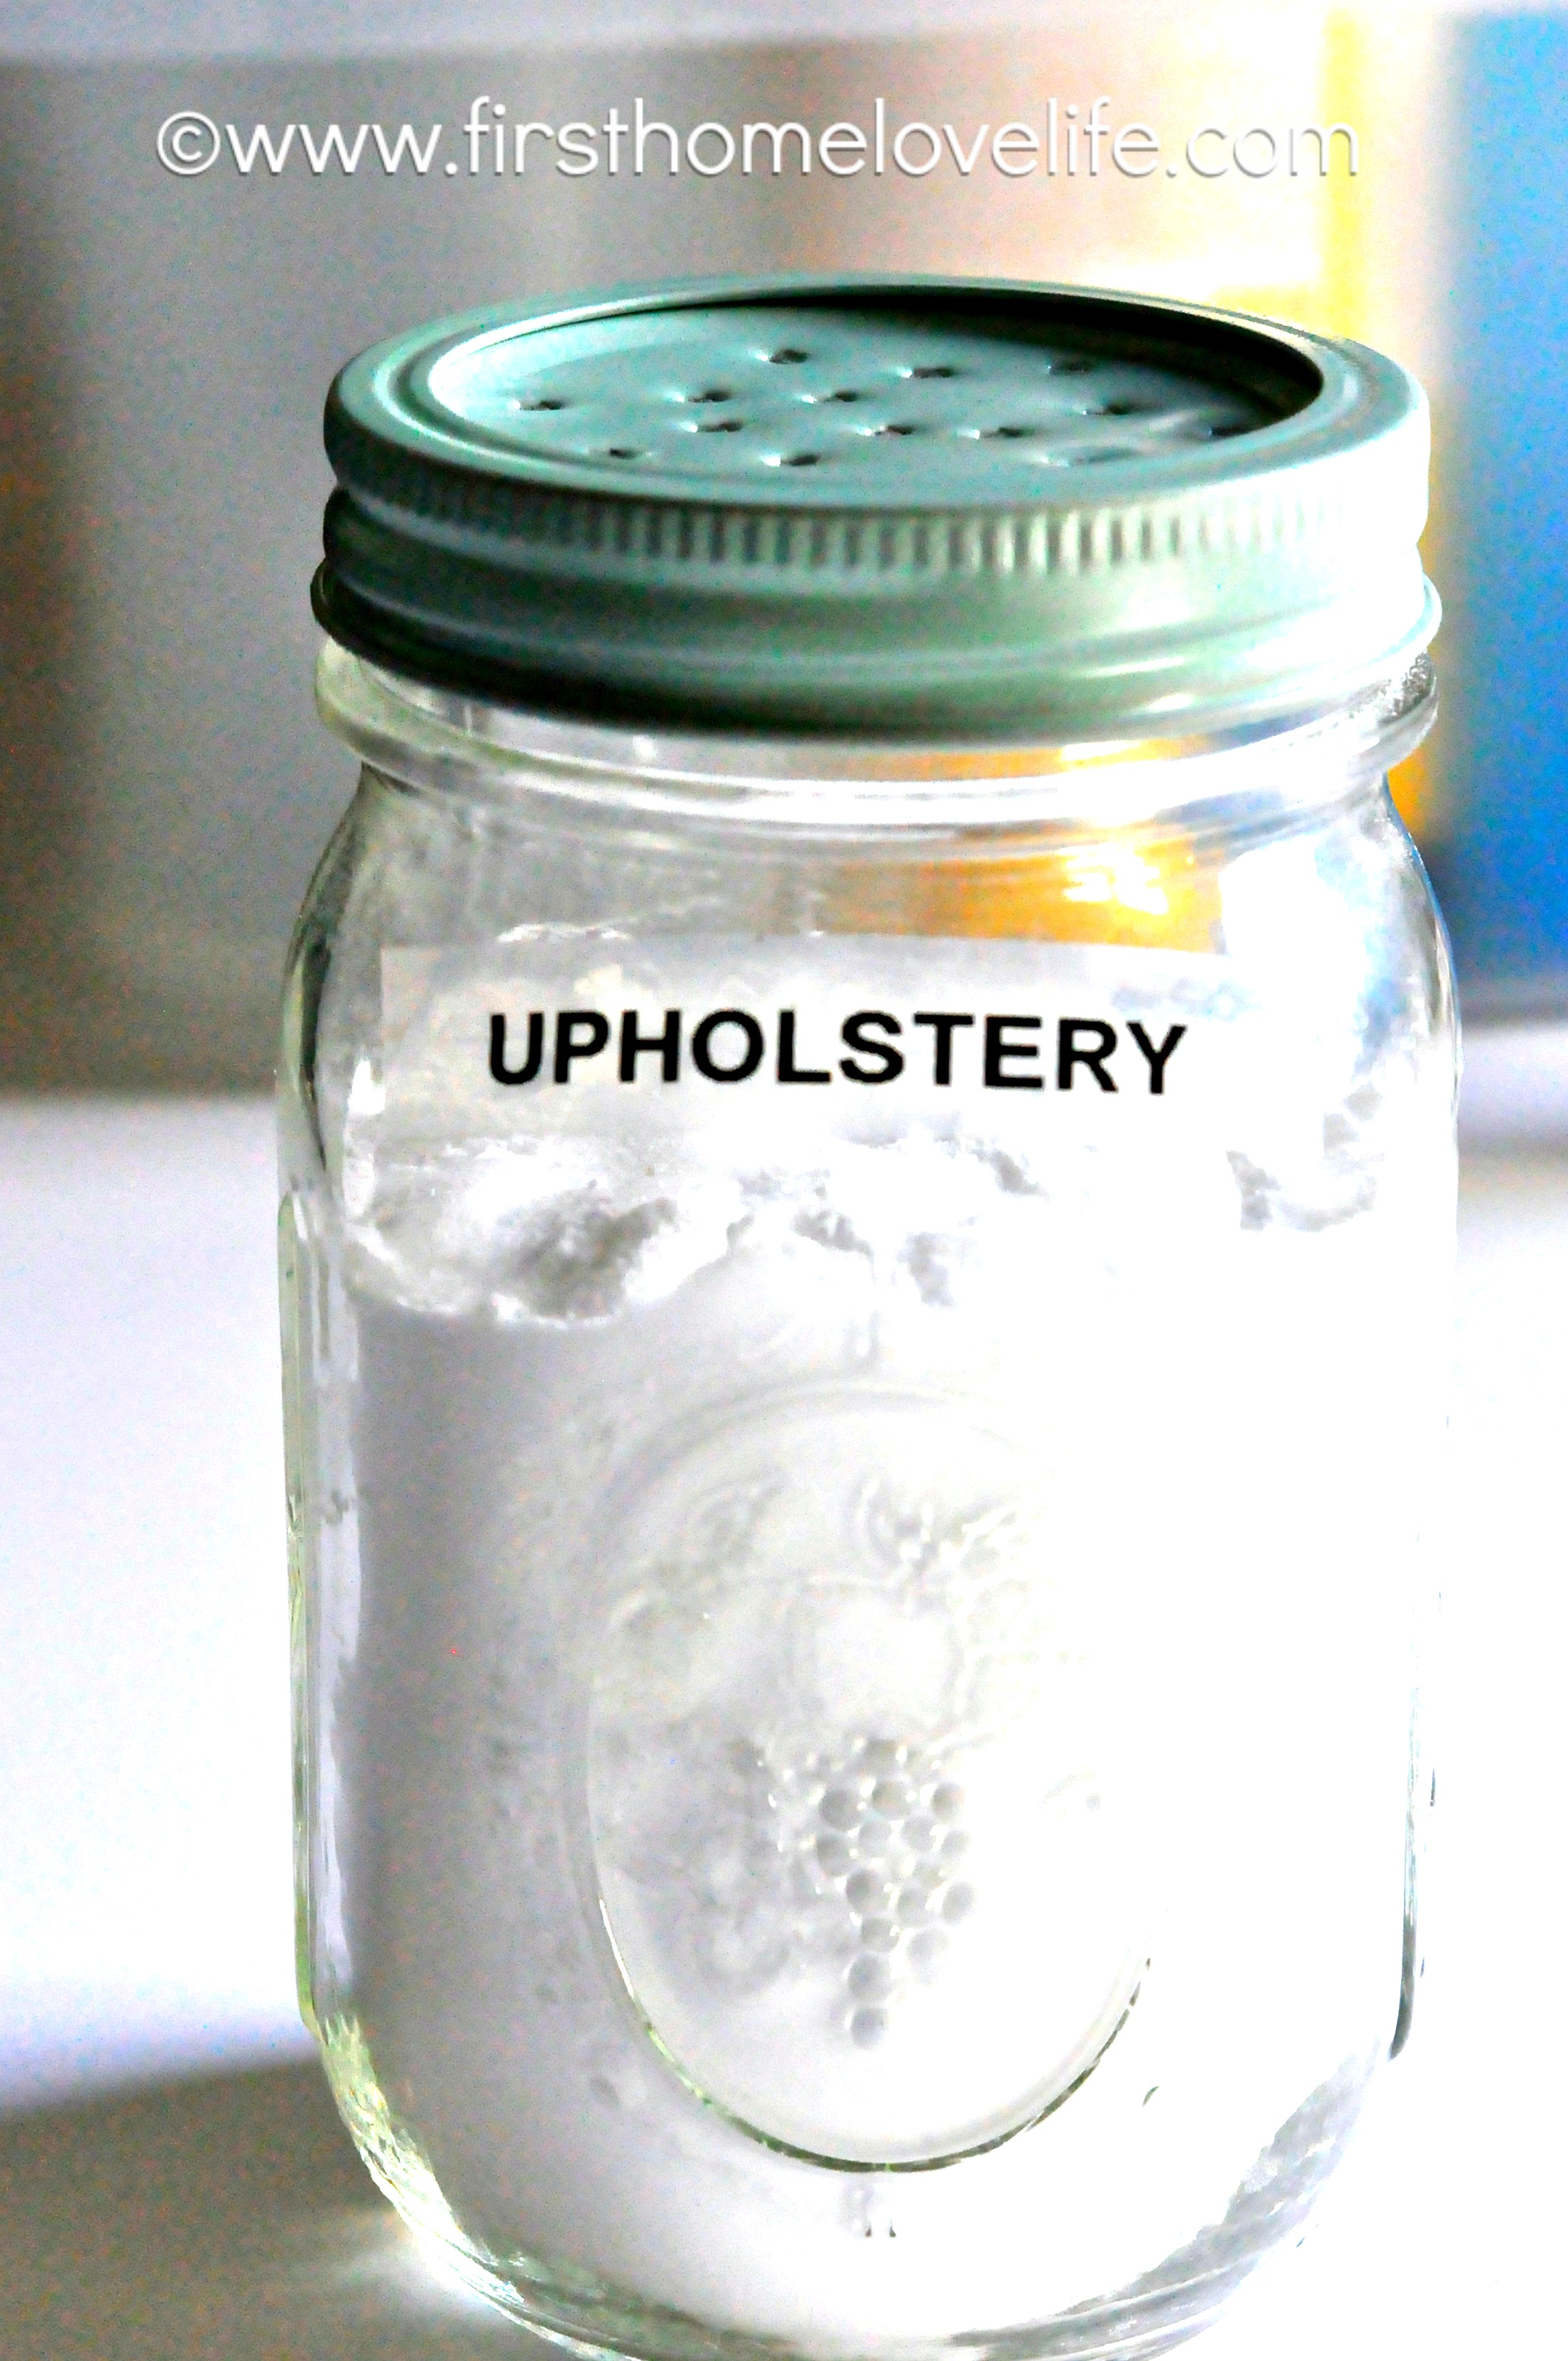 Homemade Upholstery Cleaner - First